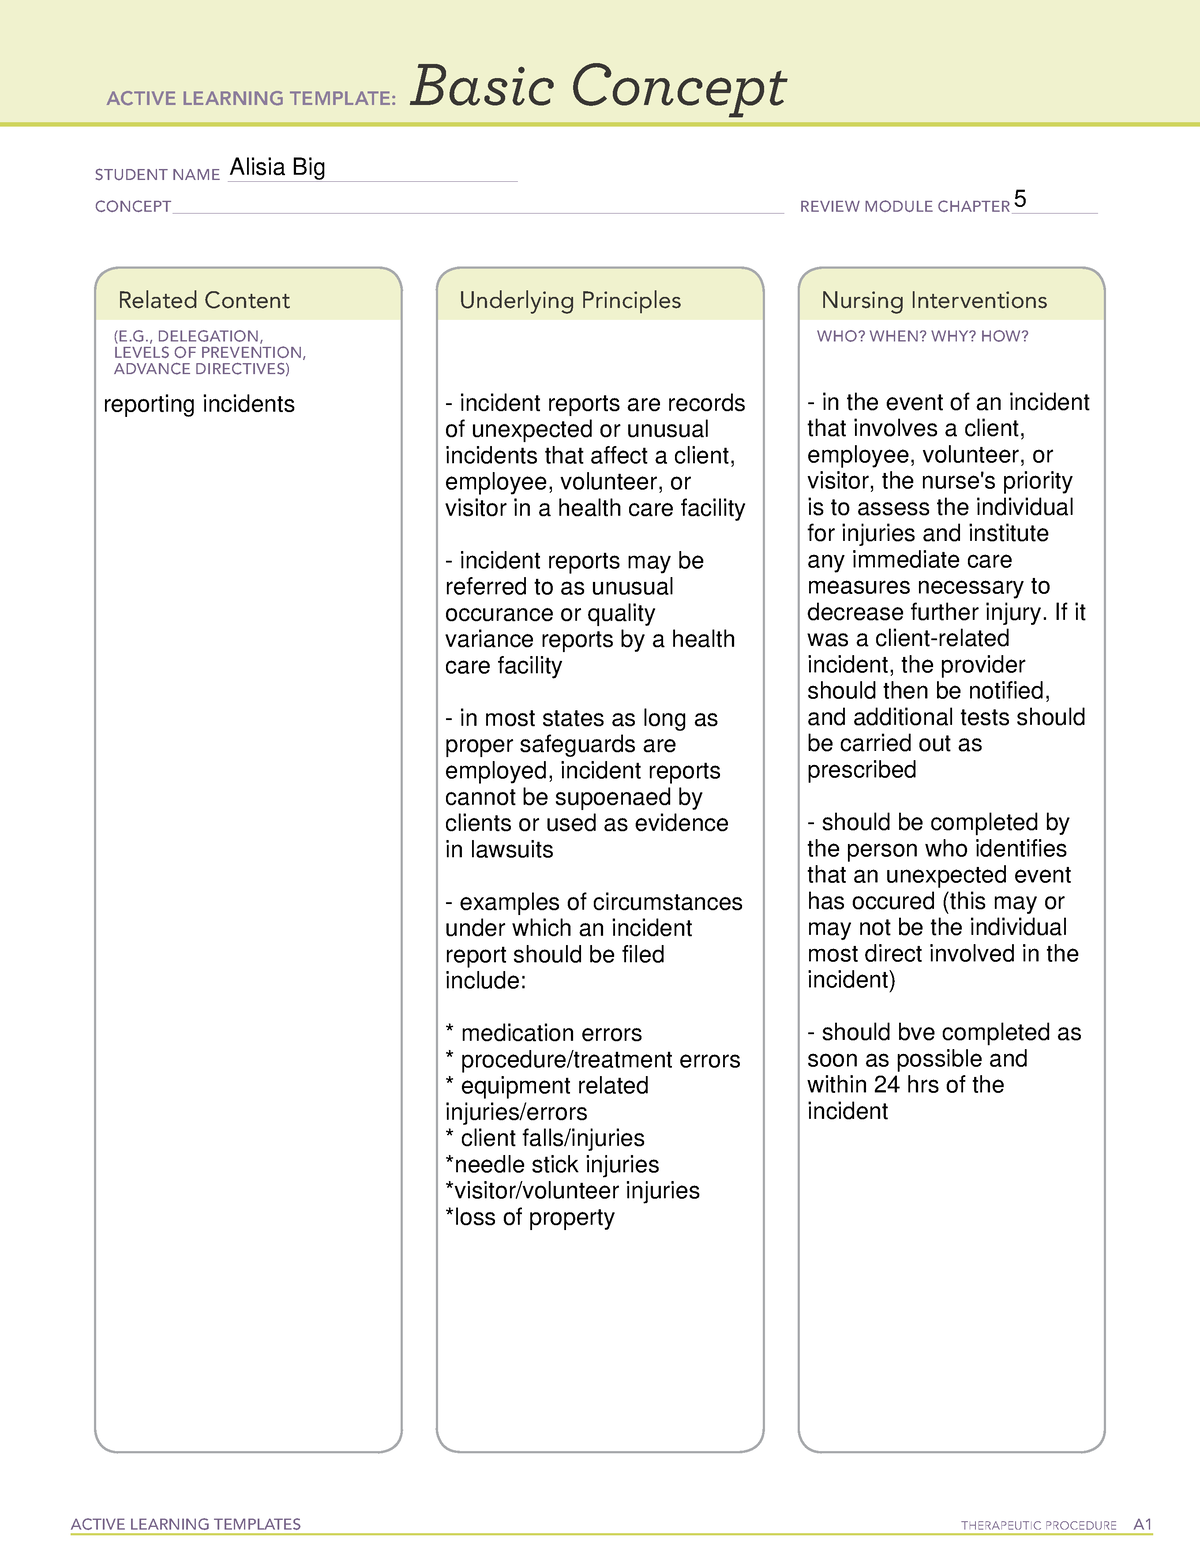 Leadership ATI Active Learning Template ACTIVE LEARNING TEMPLATES